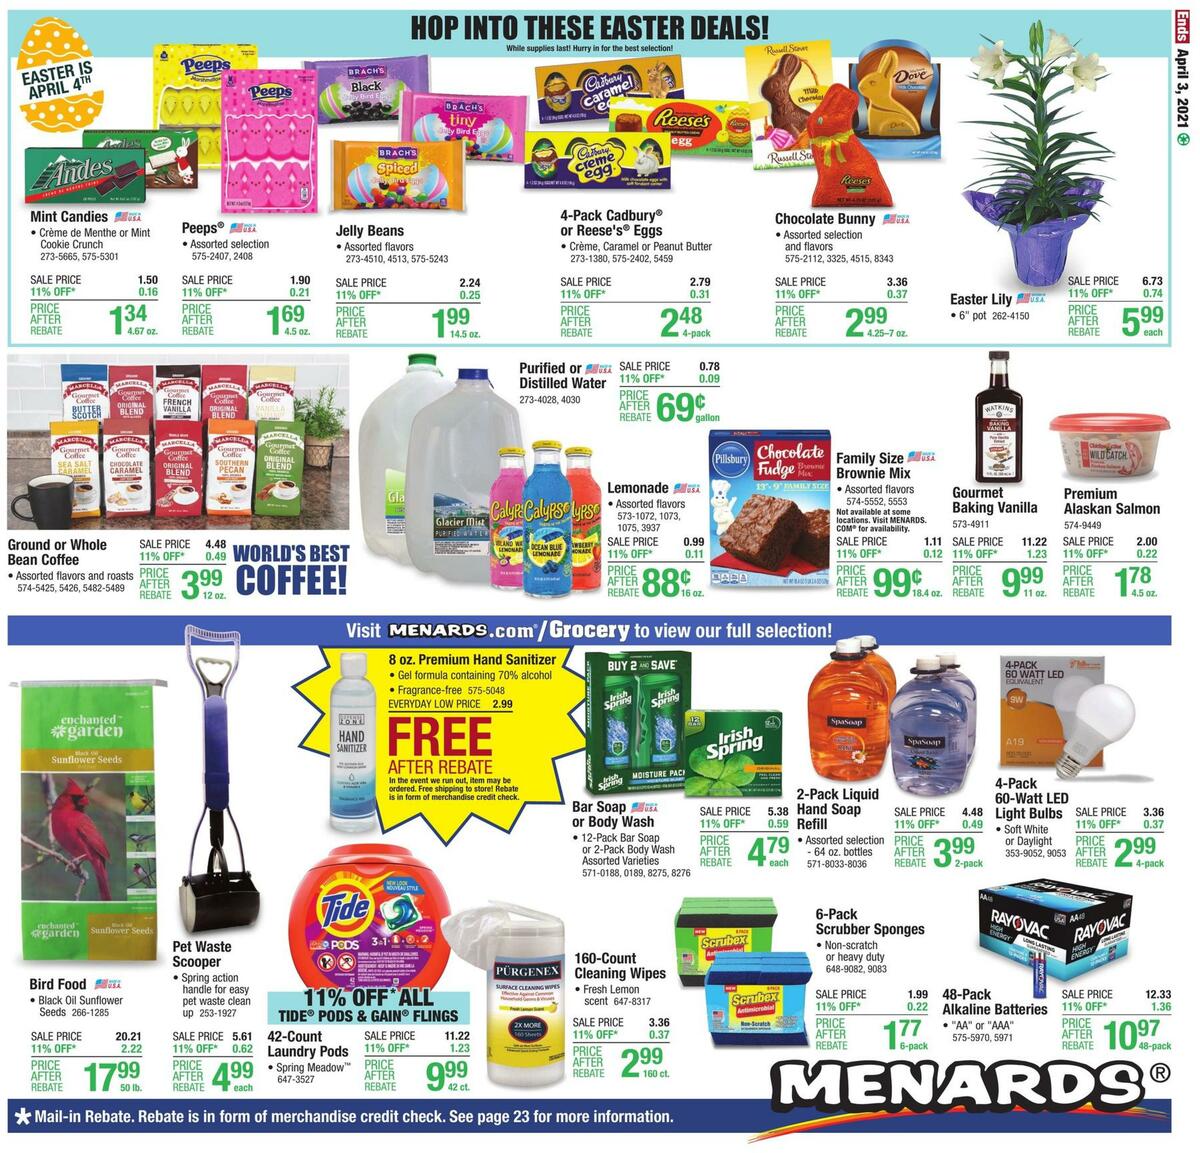 Menards Weekly Ad from March 28